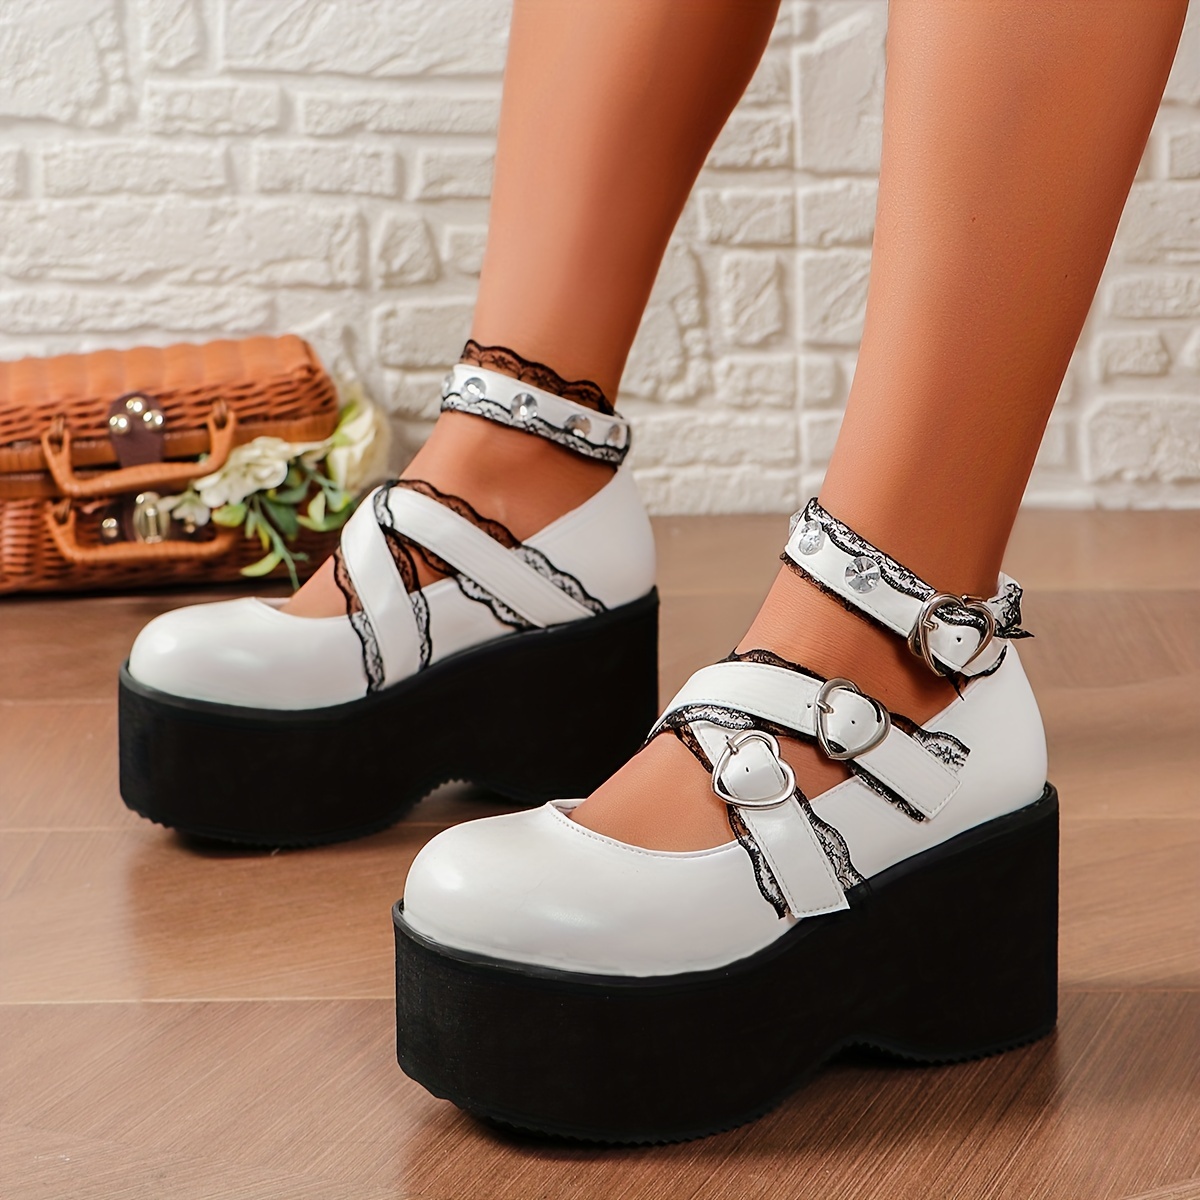 Sweet Wedge High Heels Round Toe Bowknot Platform Ankle Strap Girls Women  Shoes